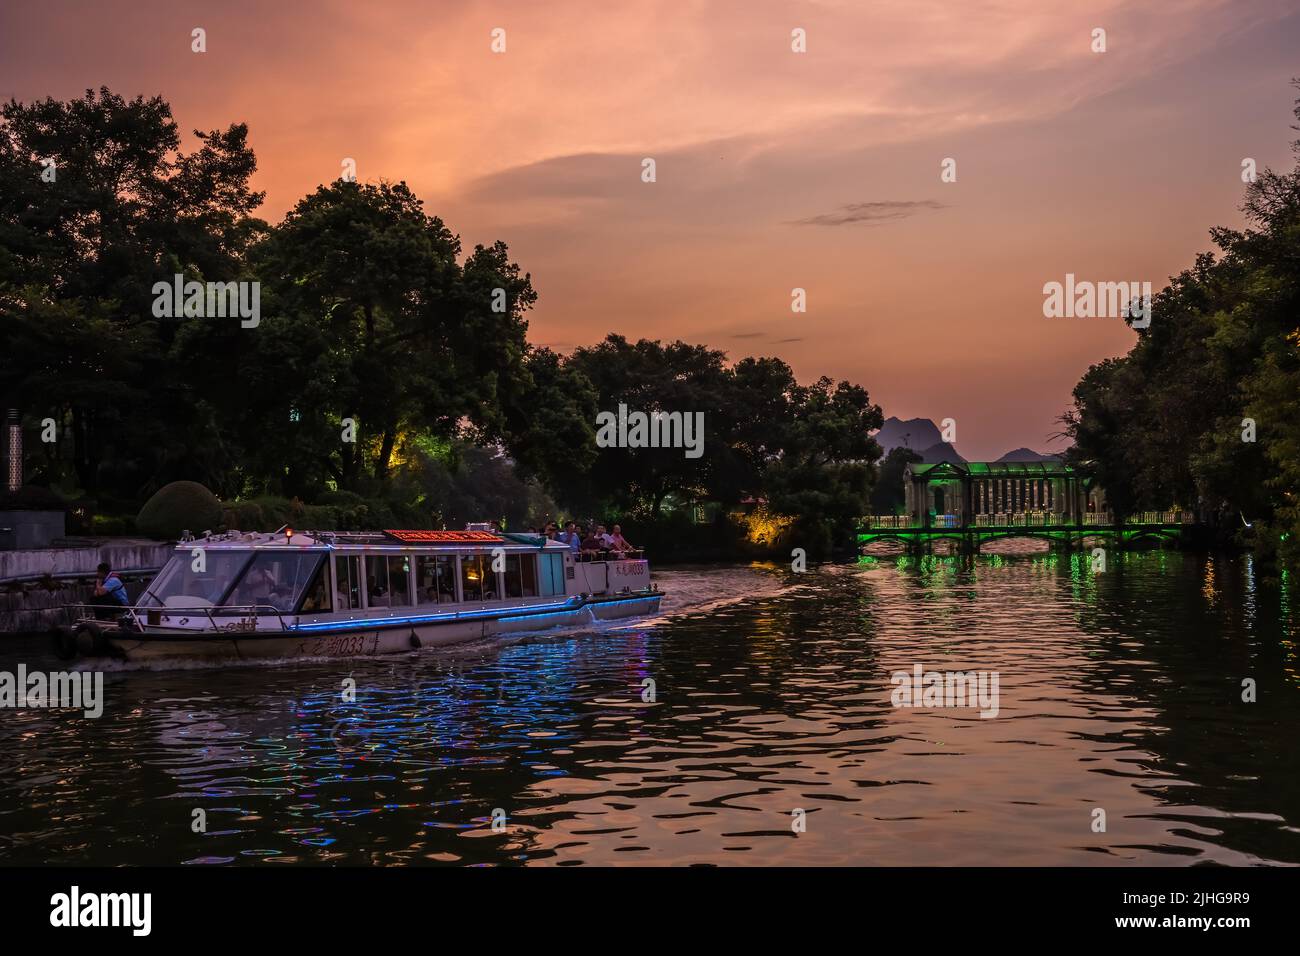 Guilin, China - August 2019 : Sightseeing tour boat ferry carrying tourists sailing in front of Crystal glass bridge on the Shan Lake, Guilin town, Gu Stock Photo